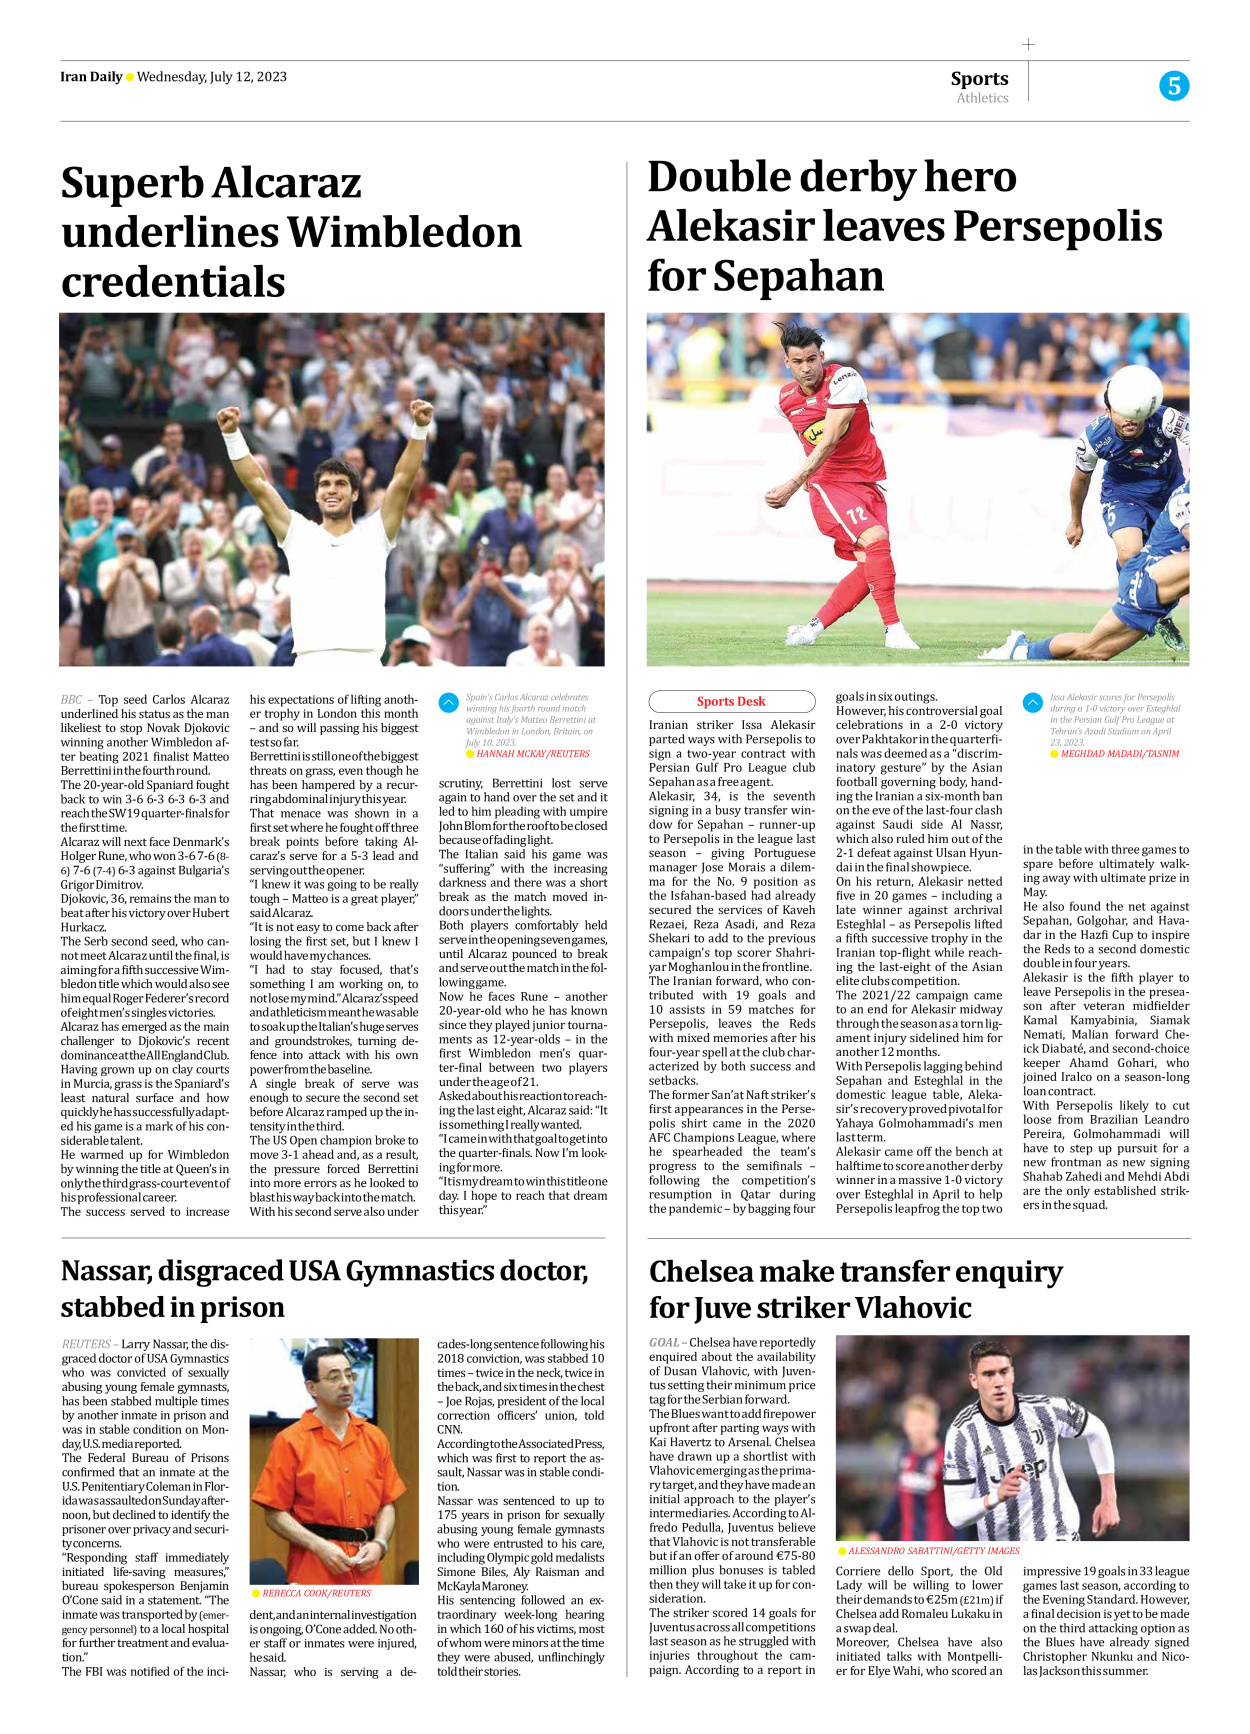 Iran Daily - Number Seven Thousand Three Hundred and Thirty Seven - 12 July 2023 - Page 5